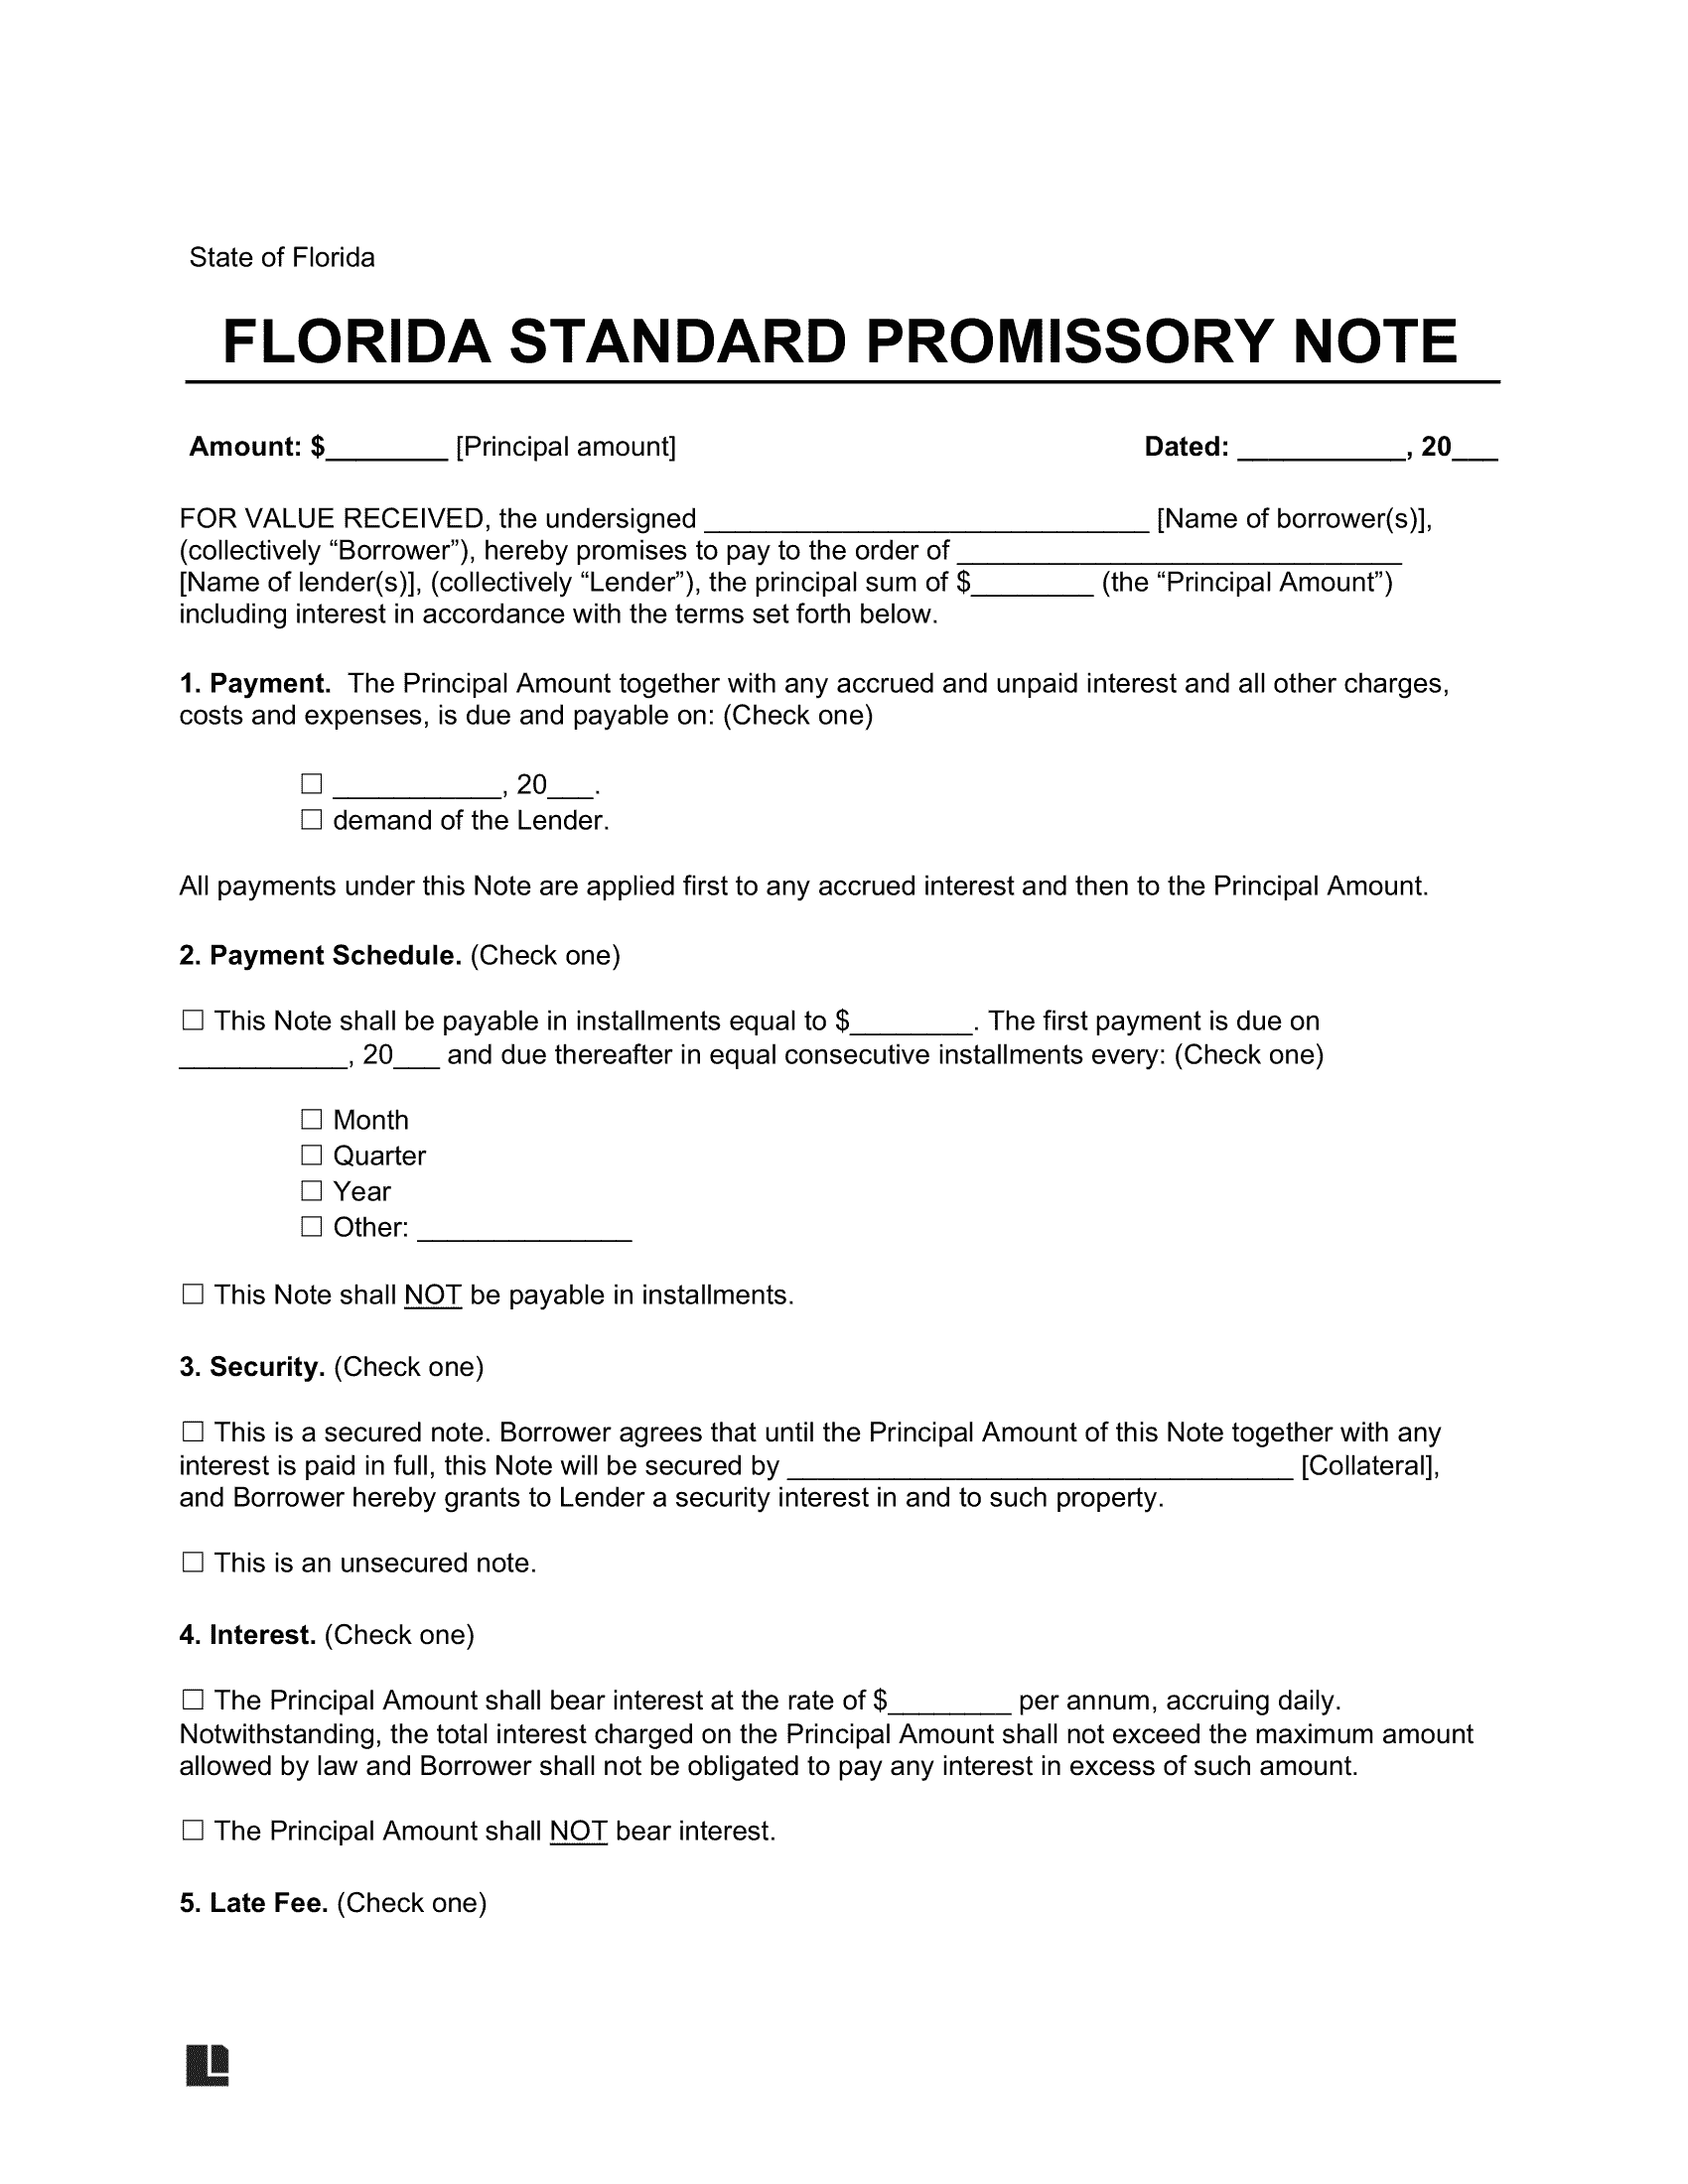 assignment of promissory note florida